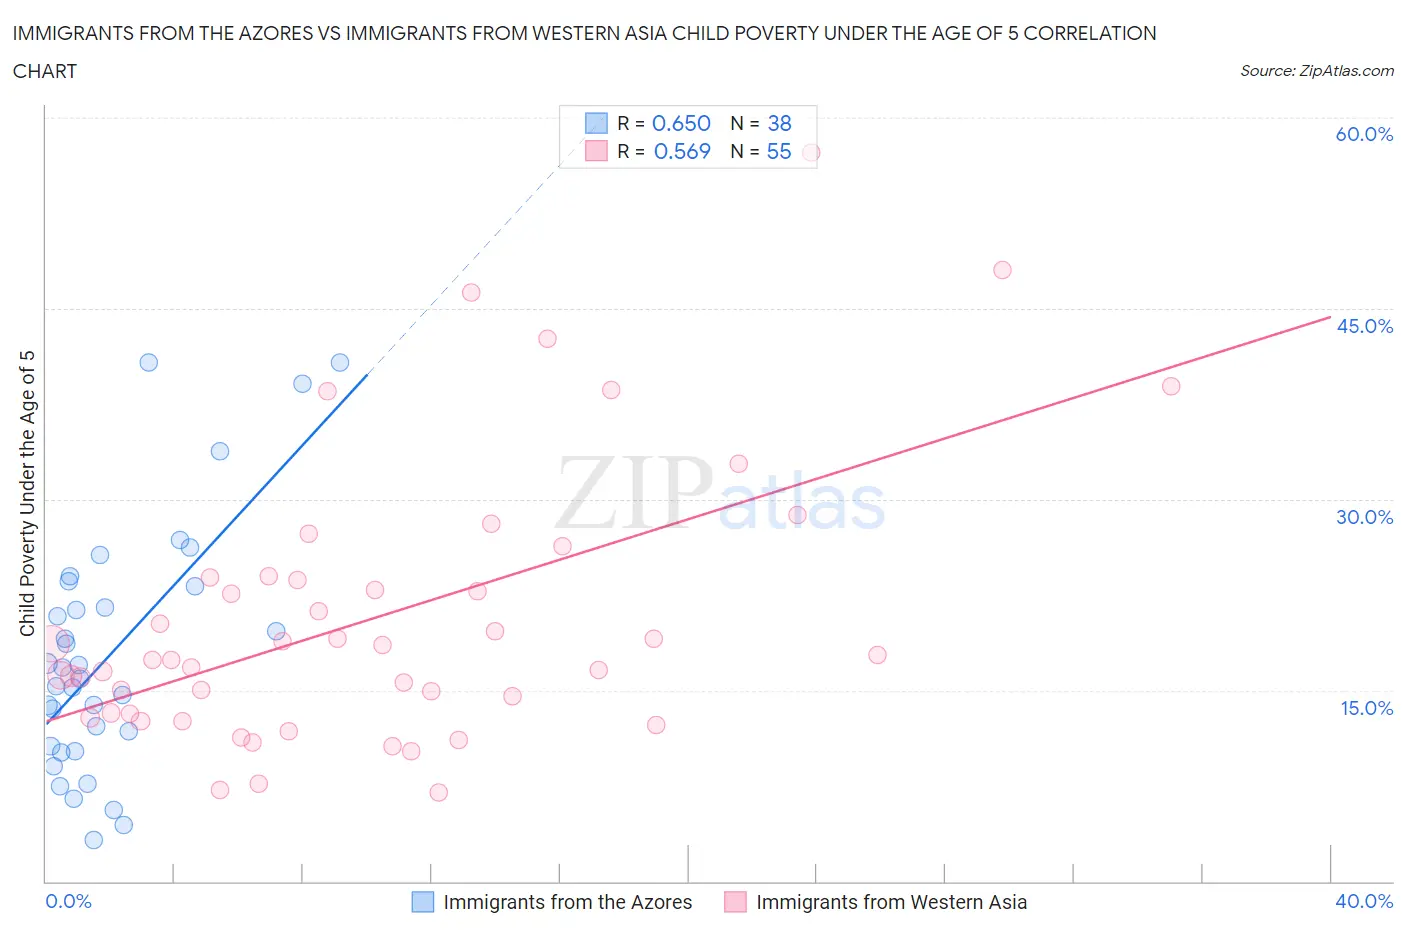 Immigrants from the Azores vs Immigrants from Western Asia Child Poverty Under the Age of 5